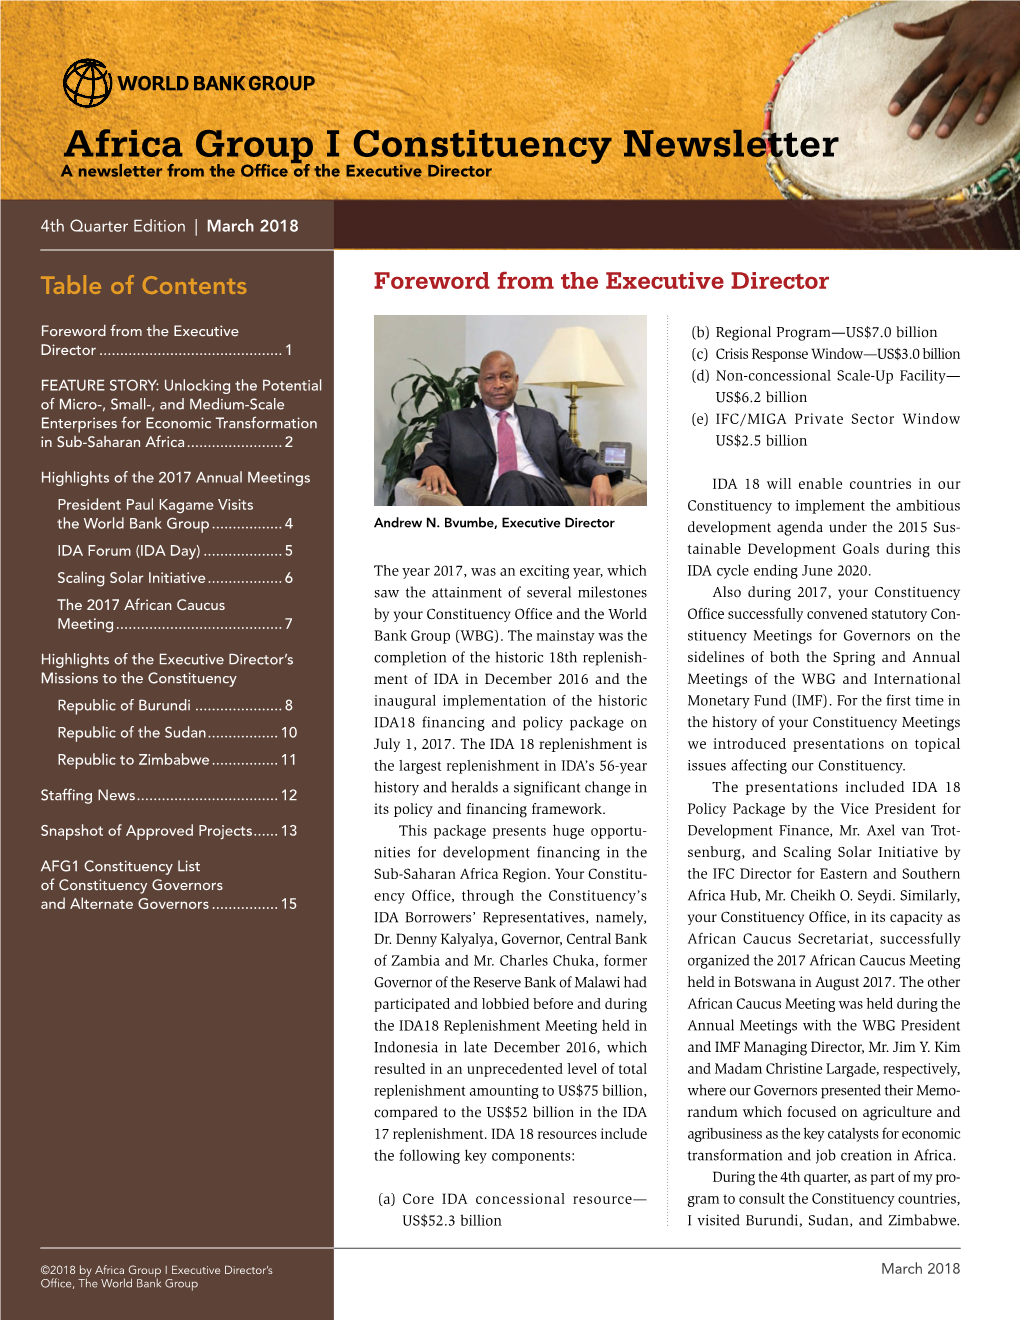 Africa Group I Constituency Newsletter a Newsletter from the Office of the Executive Director